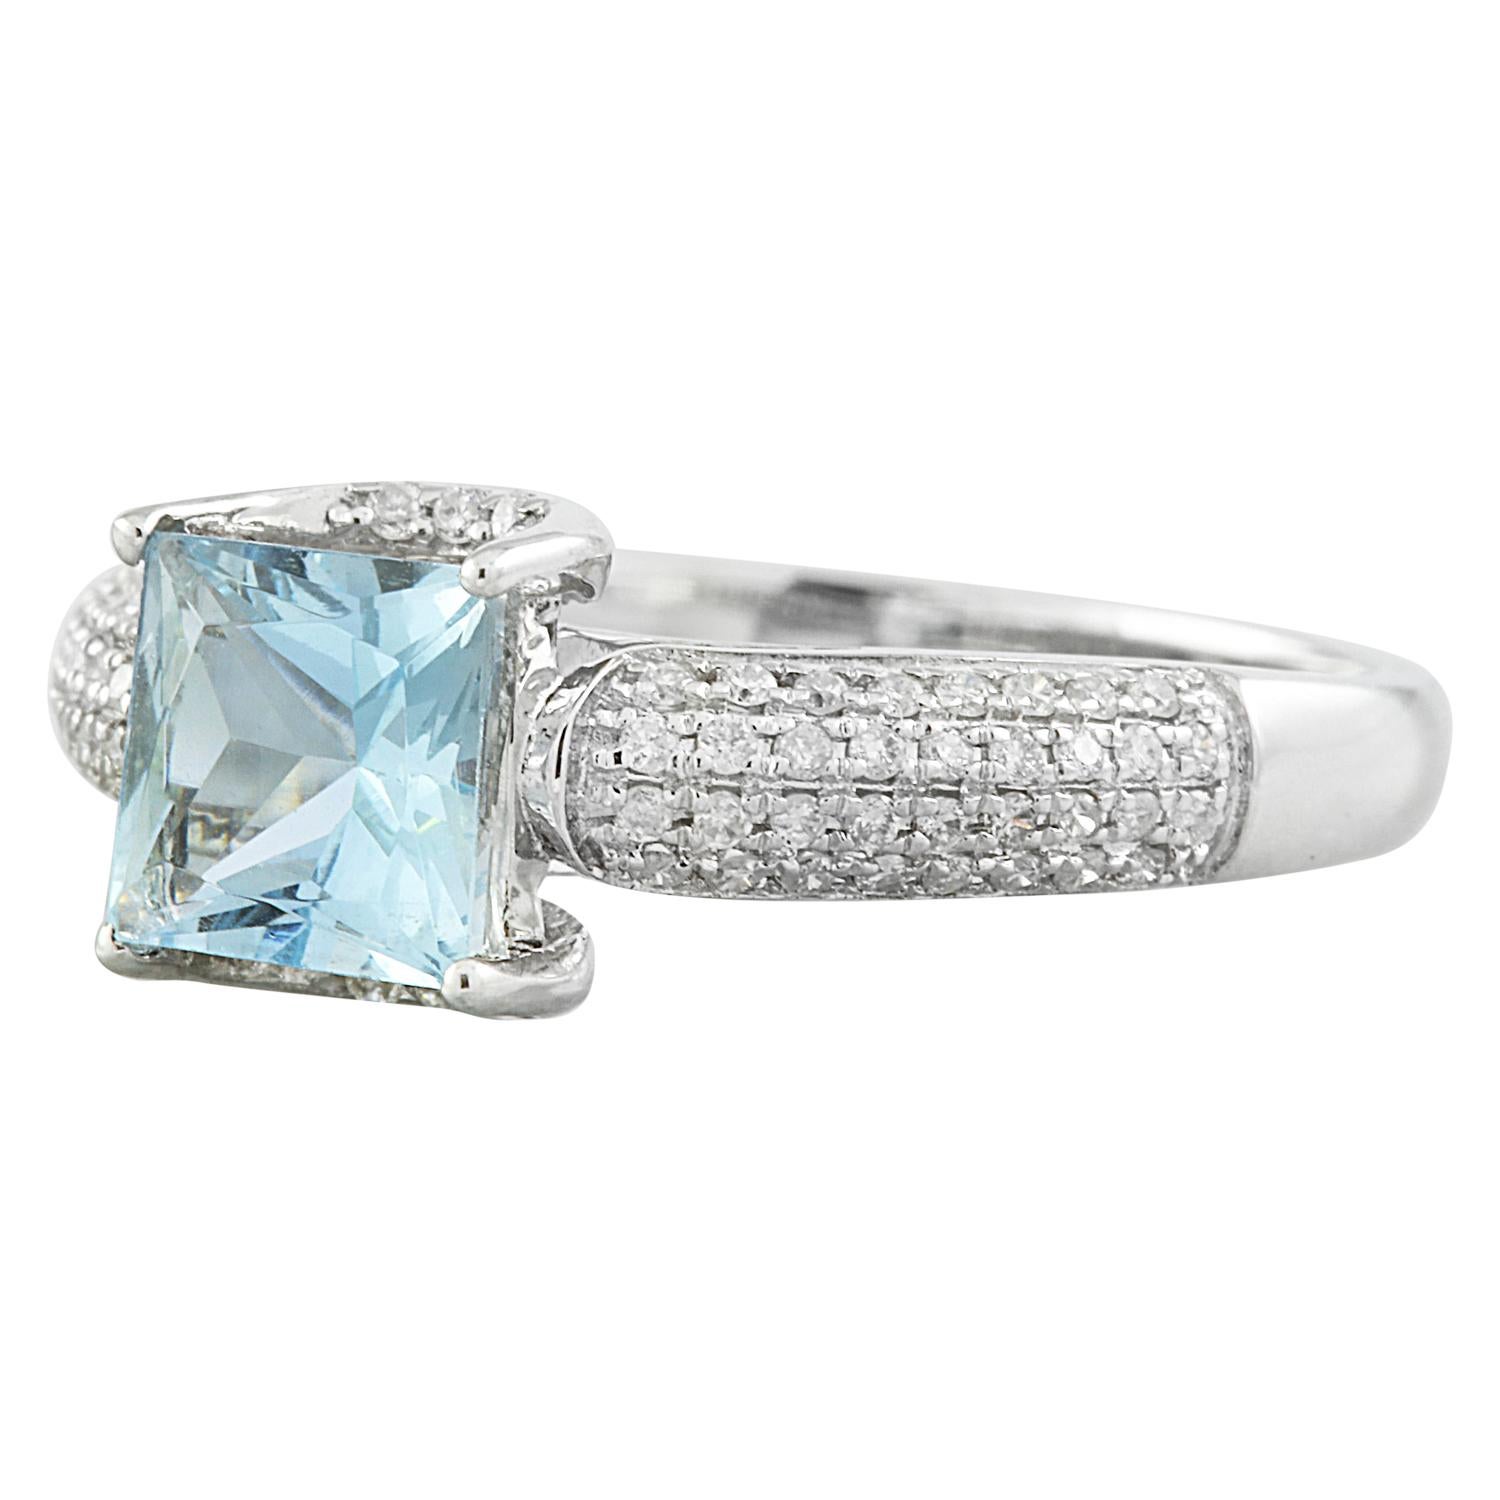 Introducing our exquisite 14K Solid White Gold Diamond Ring, featuring a stunning 1.65 Carat Natural Aquamarine. This elegant piece is stamped with the hallmark of authenticity, ensuring its quality craftsmanship. Weighing a total of 2.7 grams, this